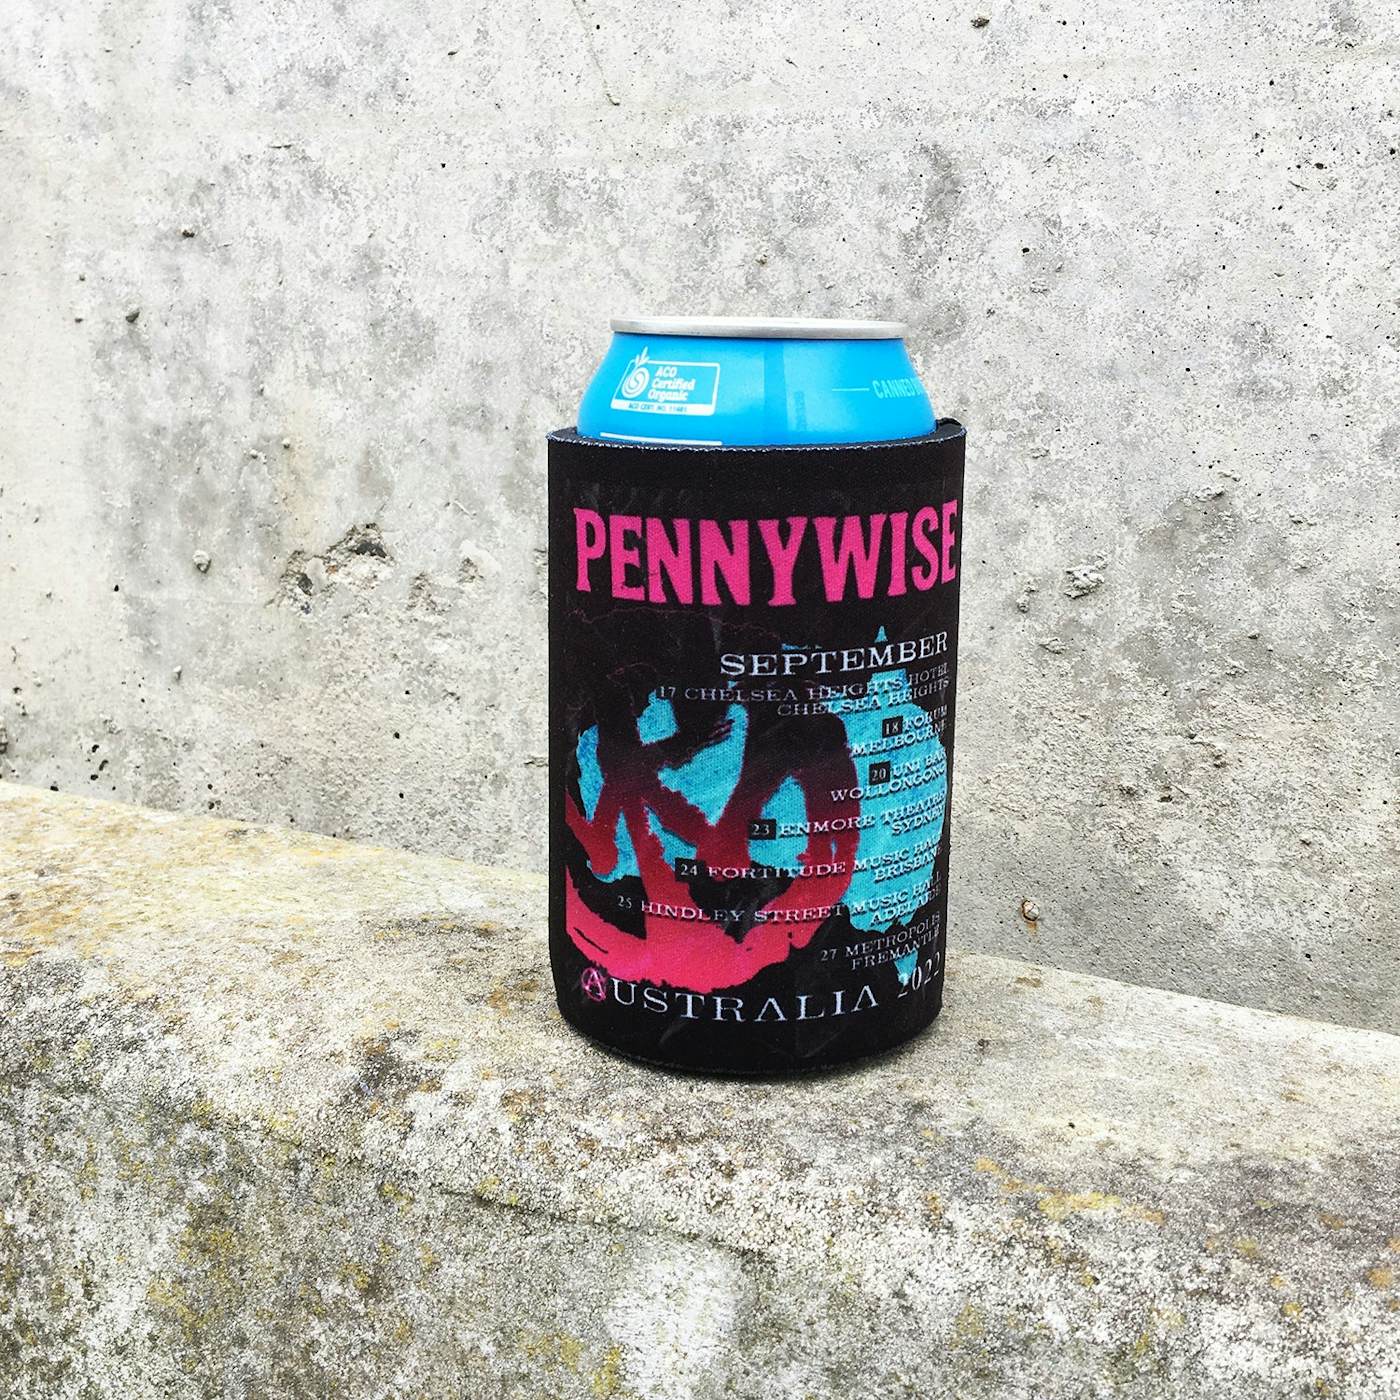 Pennywise 2022 Tour Stubby Holder